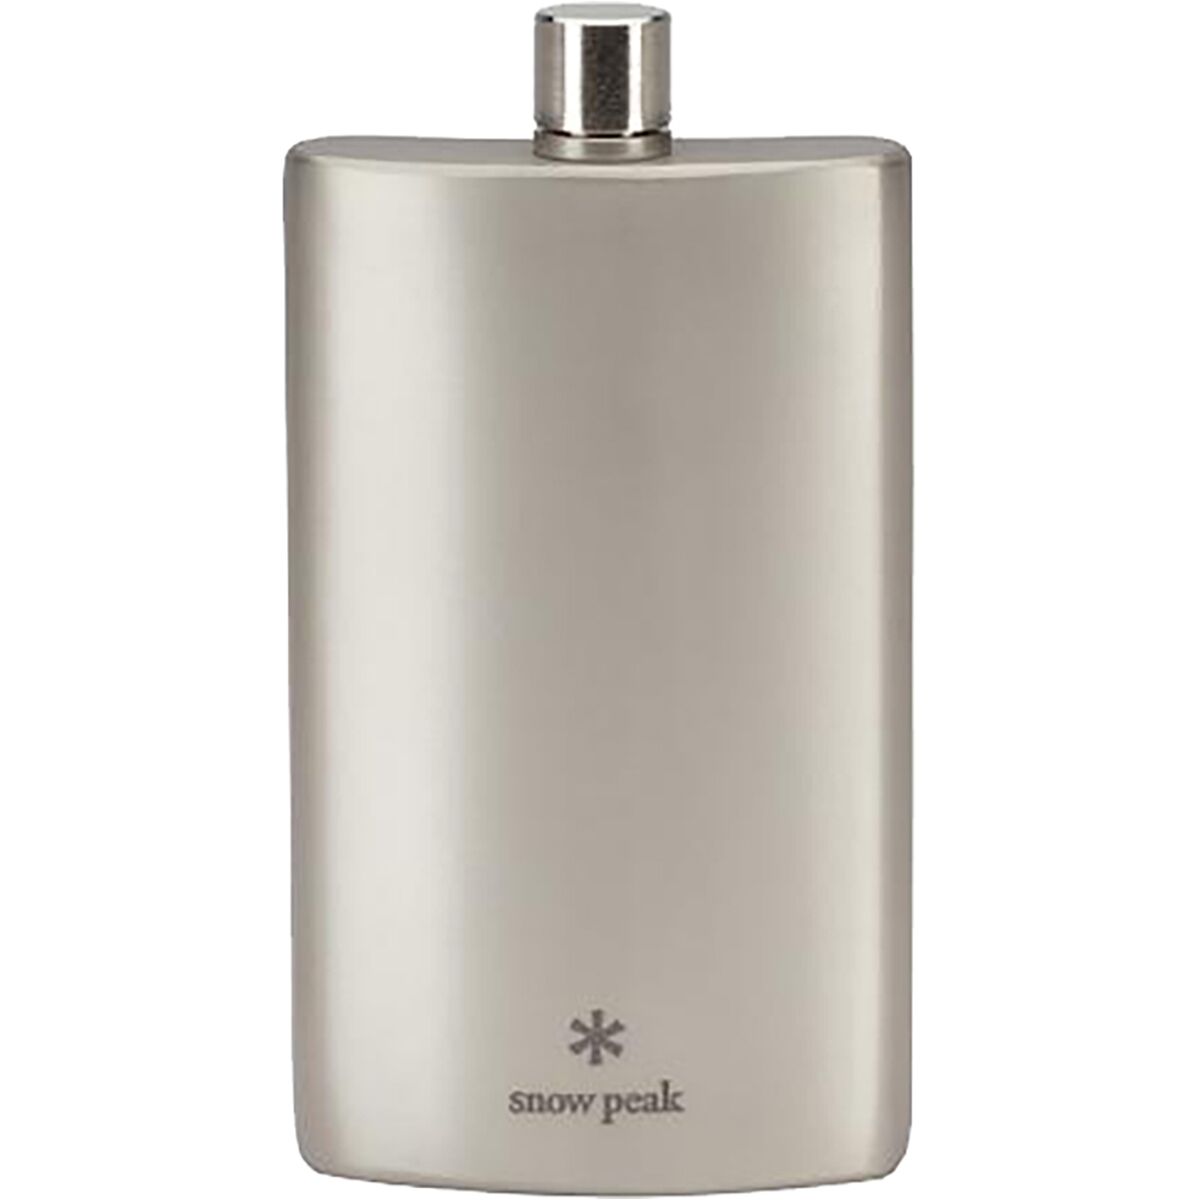 Snow Peak Titanium Flask T-012 with Synthetic Leather Case from JAPAN NEW 